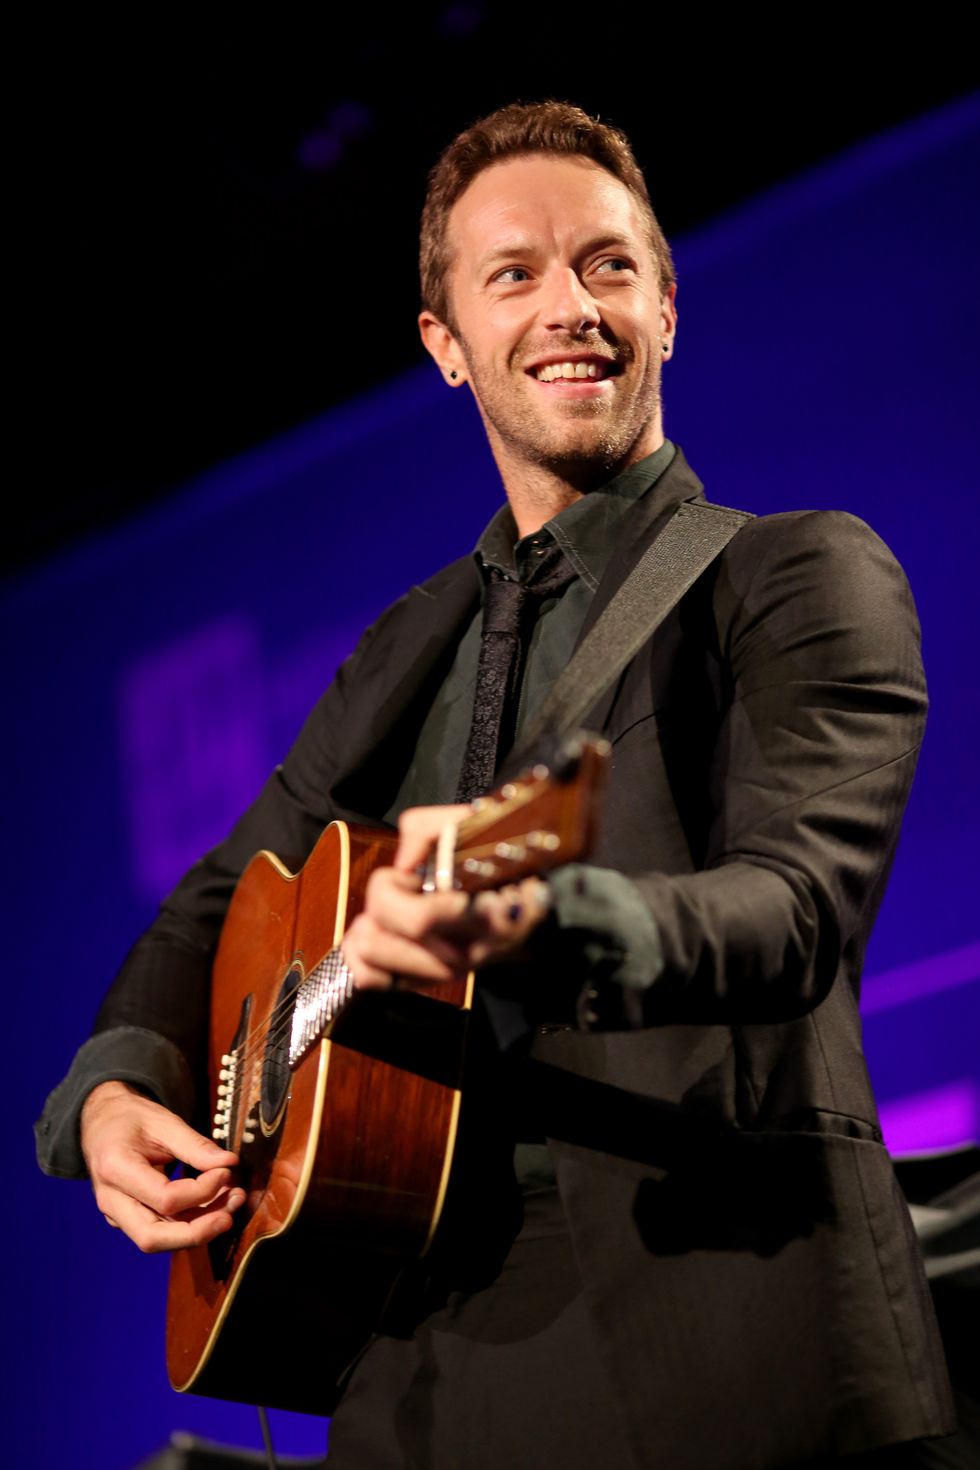 LOS ANGELES, CA - JANUARY 10:  Chris Martin of Coldplay performs at the 4th Annual Sean Penn &amp; Friends HELP HAITI HOME Gala Benefiting J/P Haitian Relief Organization on January 10, 2015 in Los Angeles, California.  (Photo by Christopher Polk/Getty Images for J/P Haitian Relief Organization)